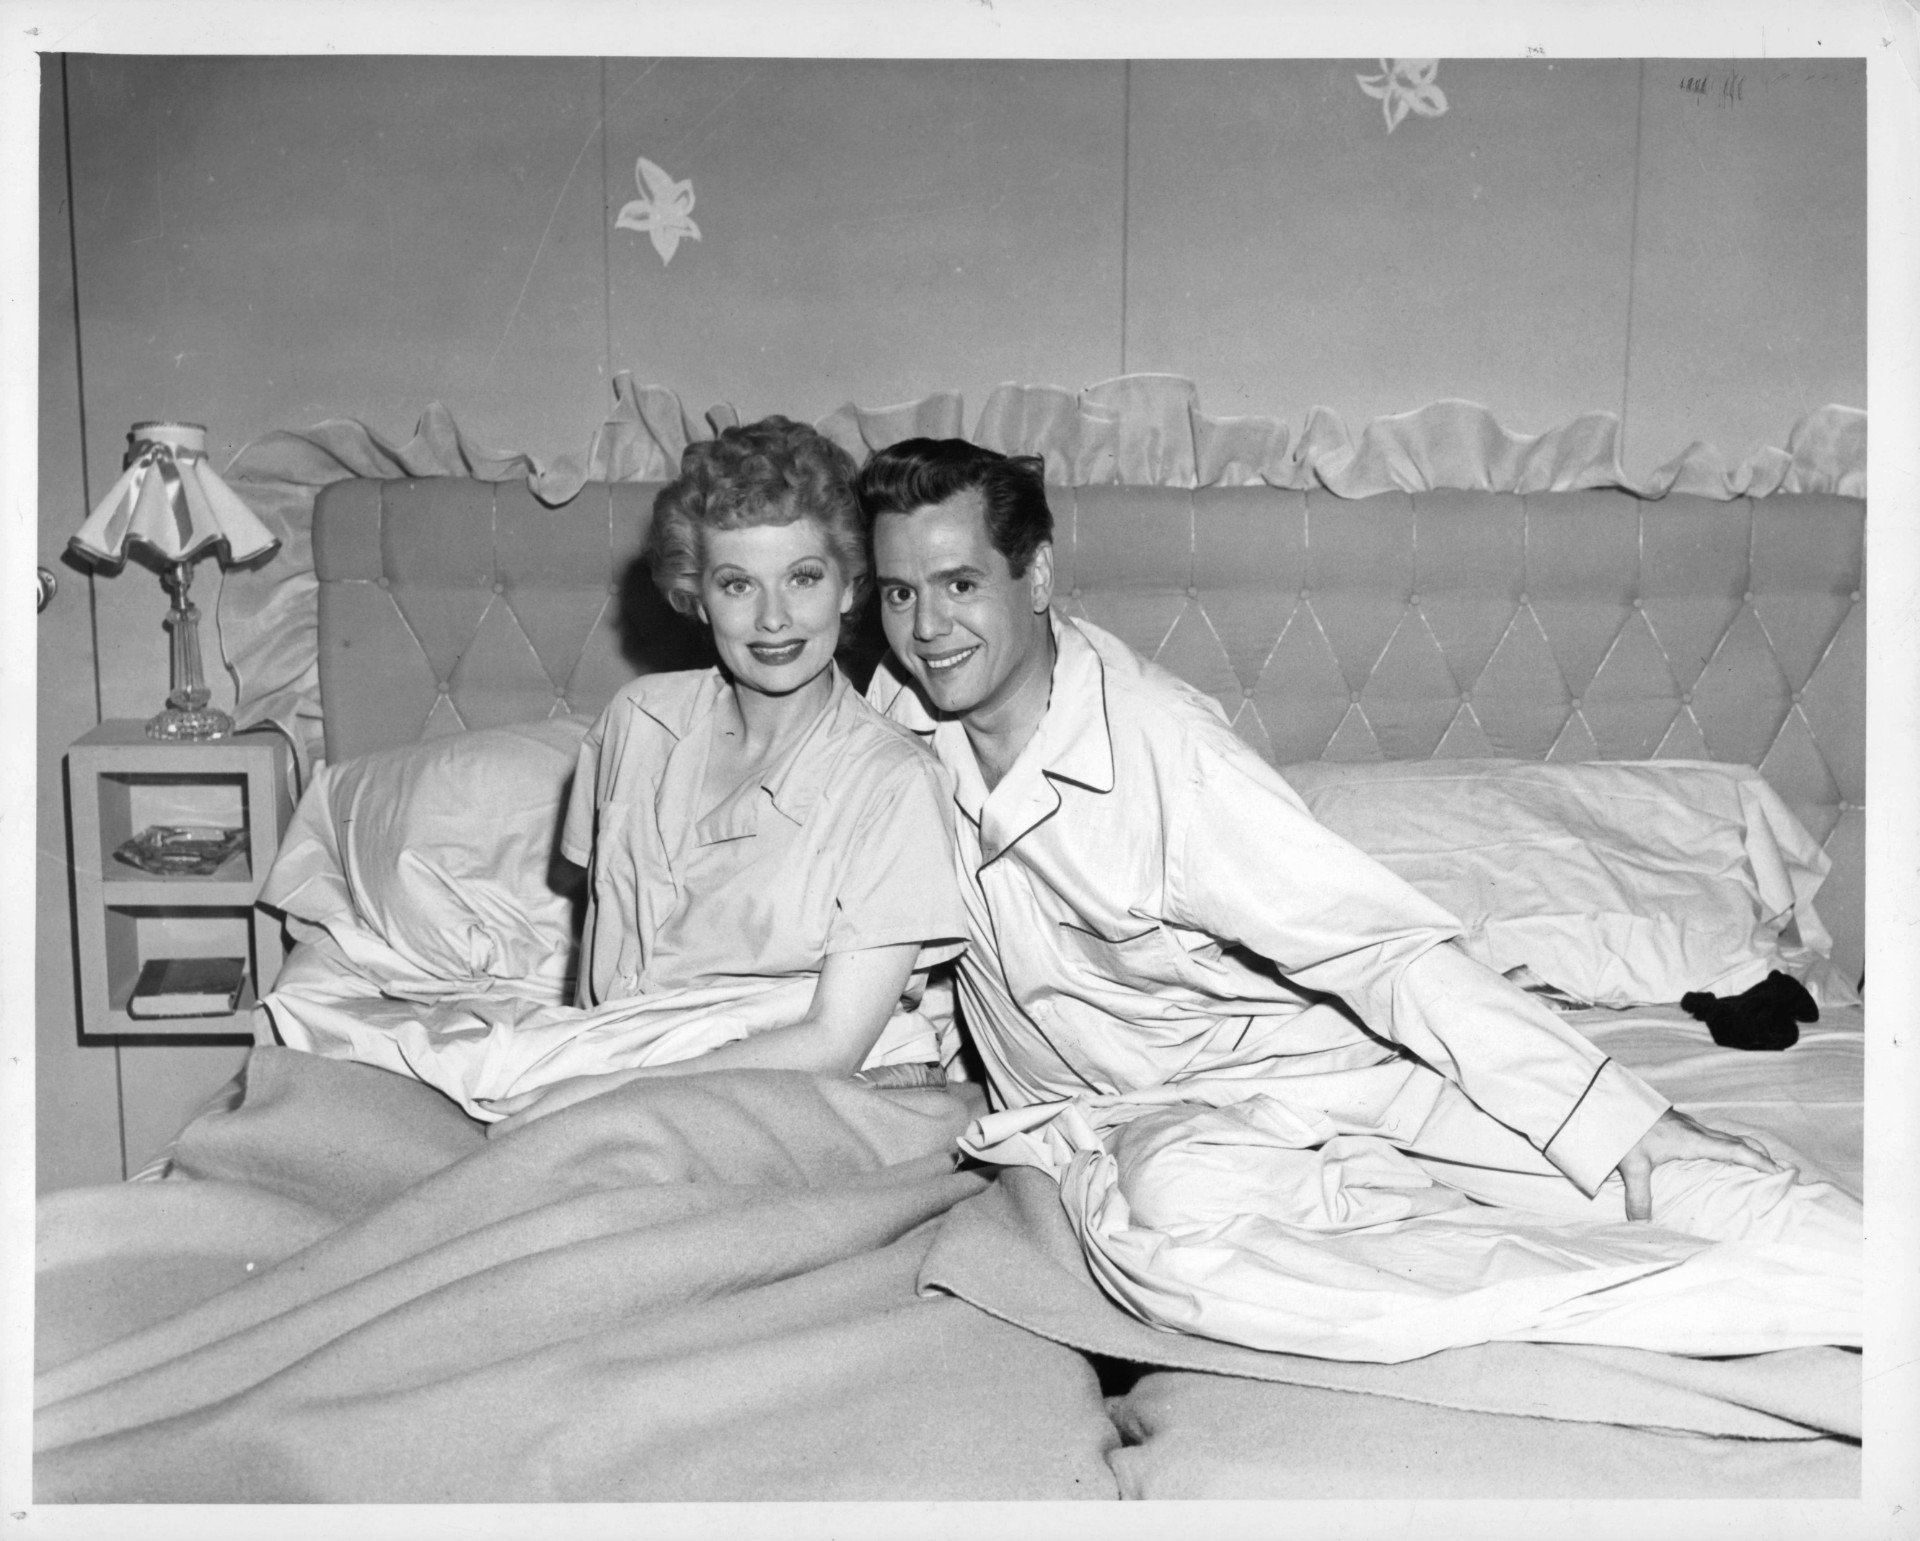 ‘I Love Lucy’: Lucille Ball on the Heartbreaking Last Days of Her Marriage to Desi Arnaz